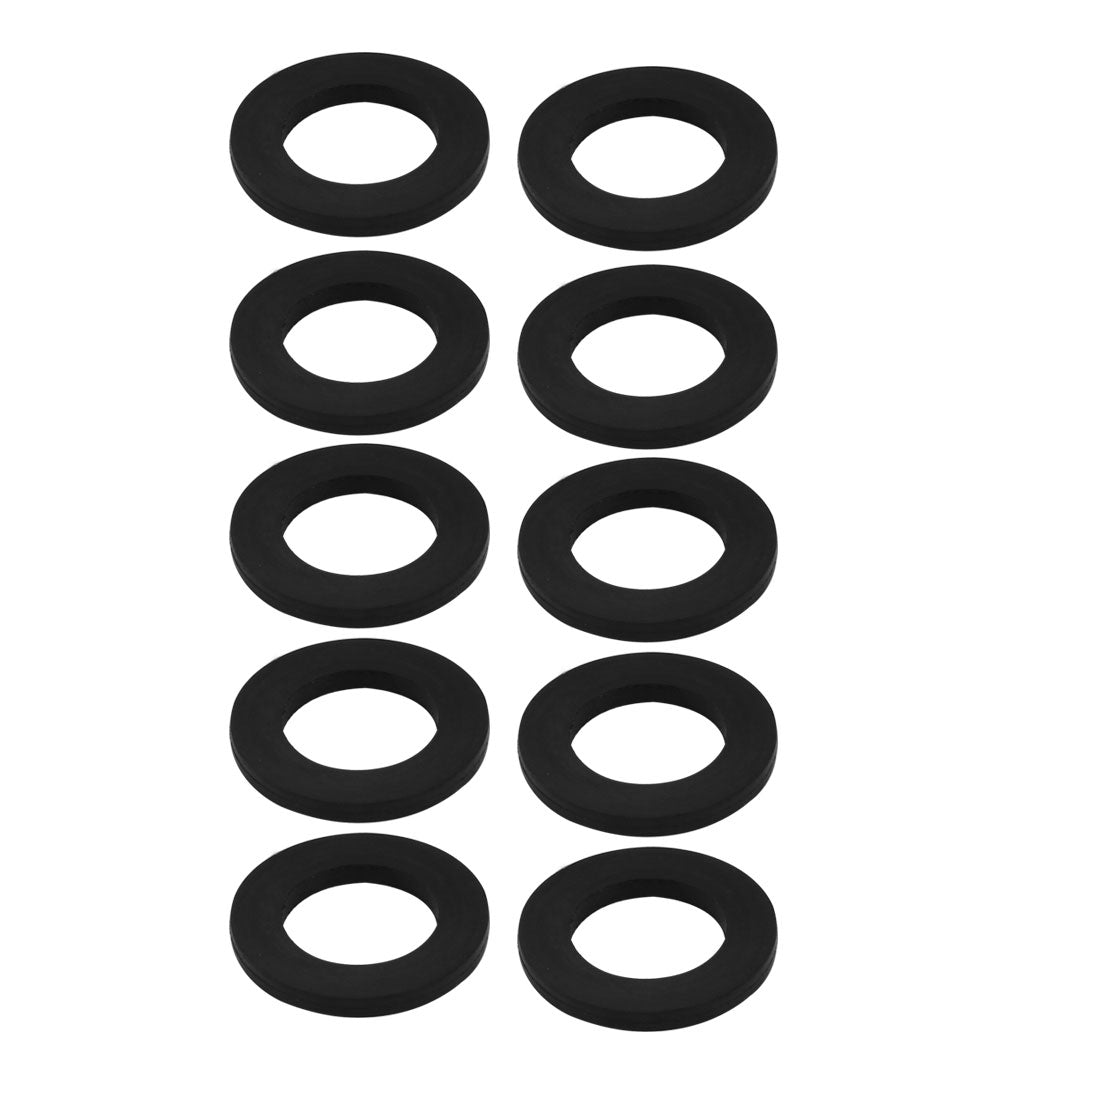 uxcell Uxcell 10pcs Black Rubber Round Flat Washer Assortment Size 14x24x3mm Flat Washer